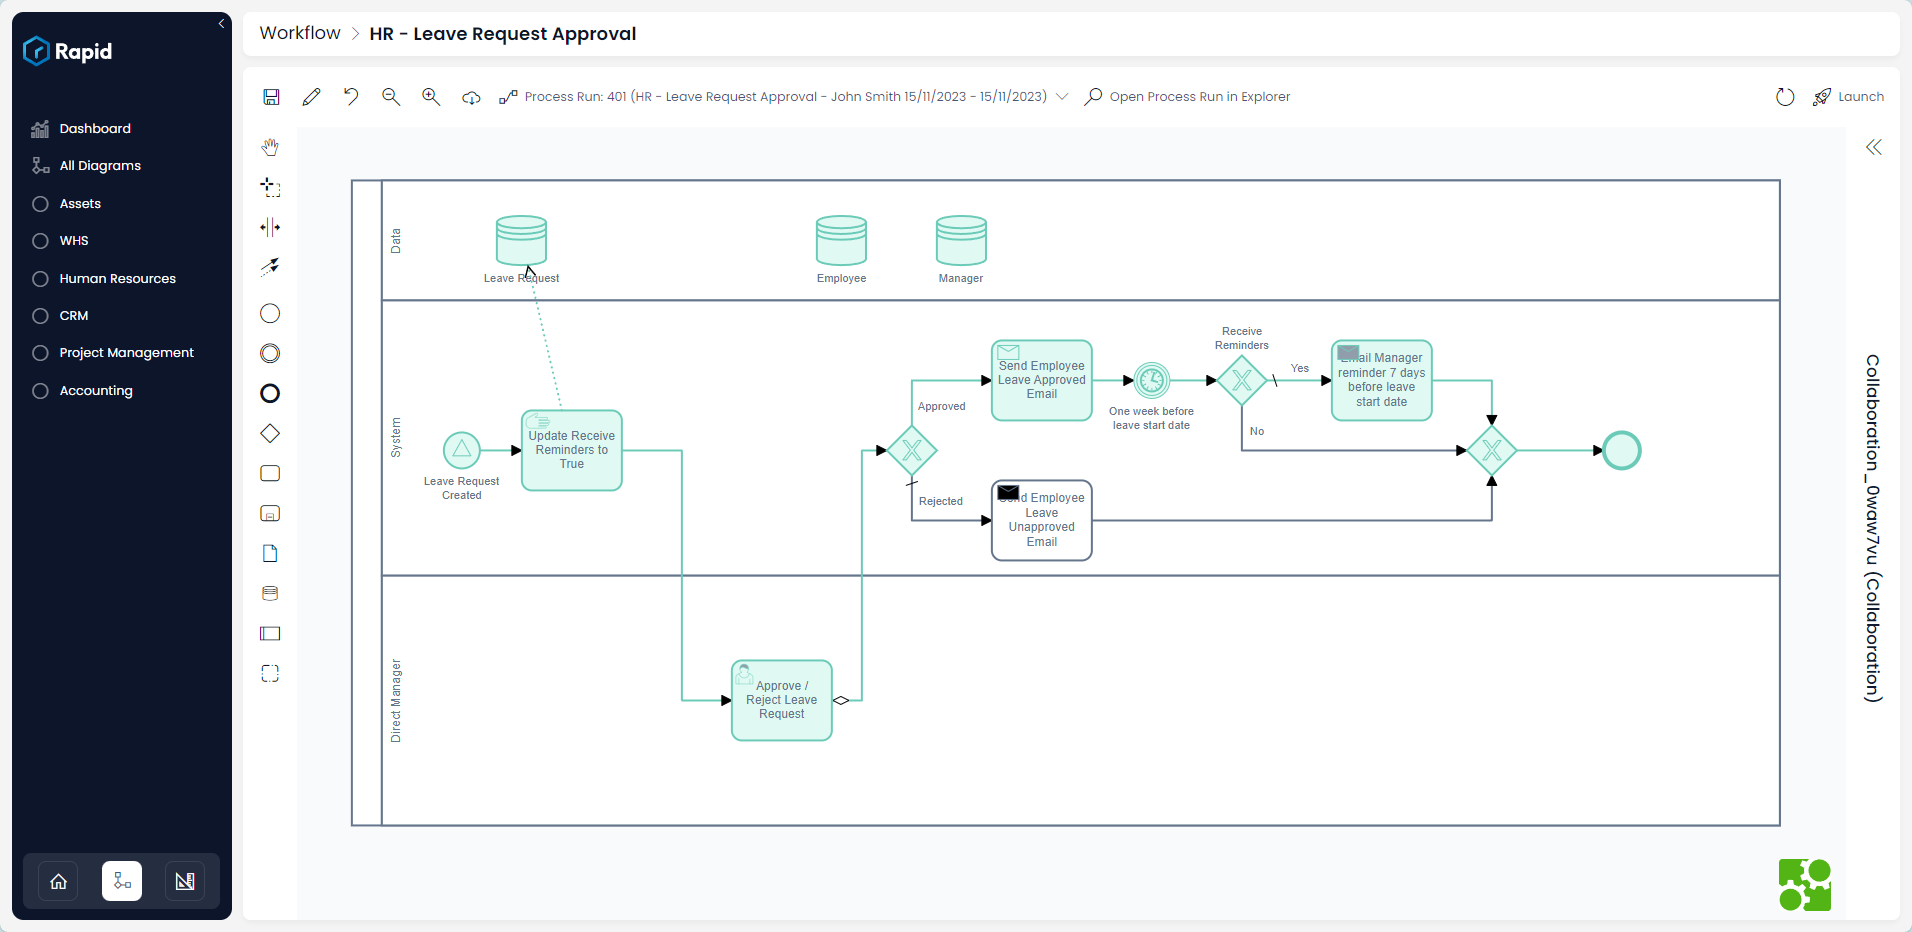 A screenshot that demonstrates the appearance of a Workflow webpage. The screenshot has a the side panel in dark blue on the left-hand side. On the right-hand side of the image, on a white and grey background, is the area for editing workflows and building automated processes. This process has been run successfully. The diagram is highlighted in green to show the route that the workflow took in order to complete the process run.